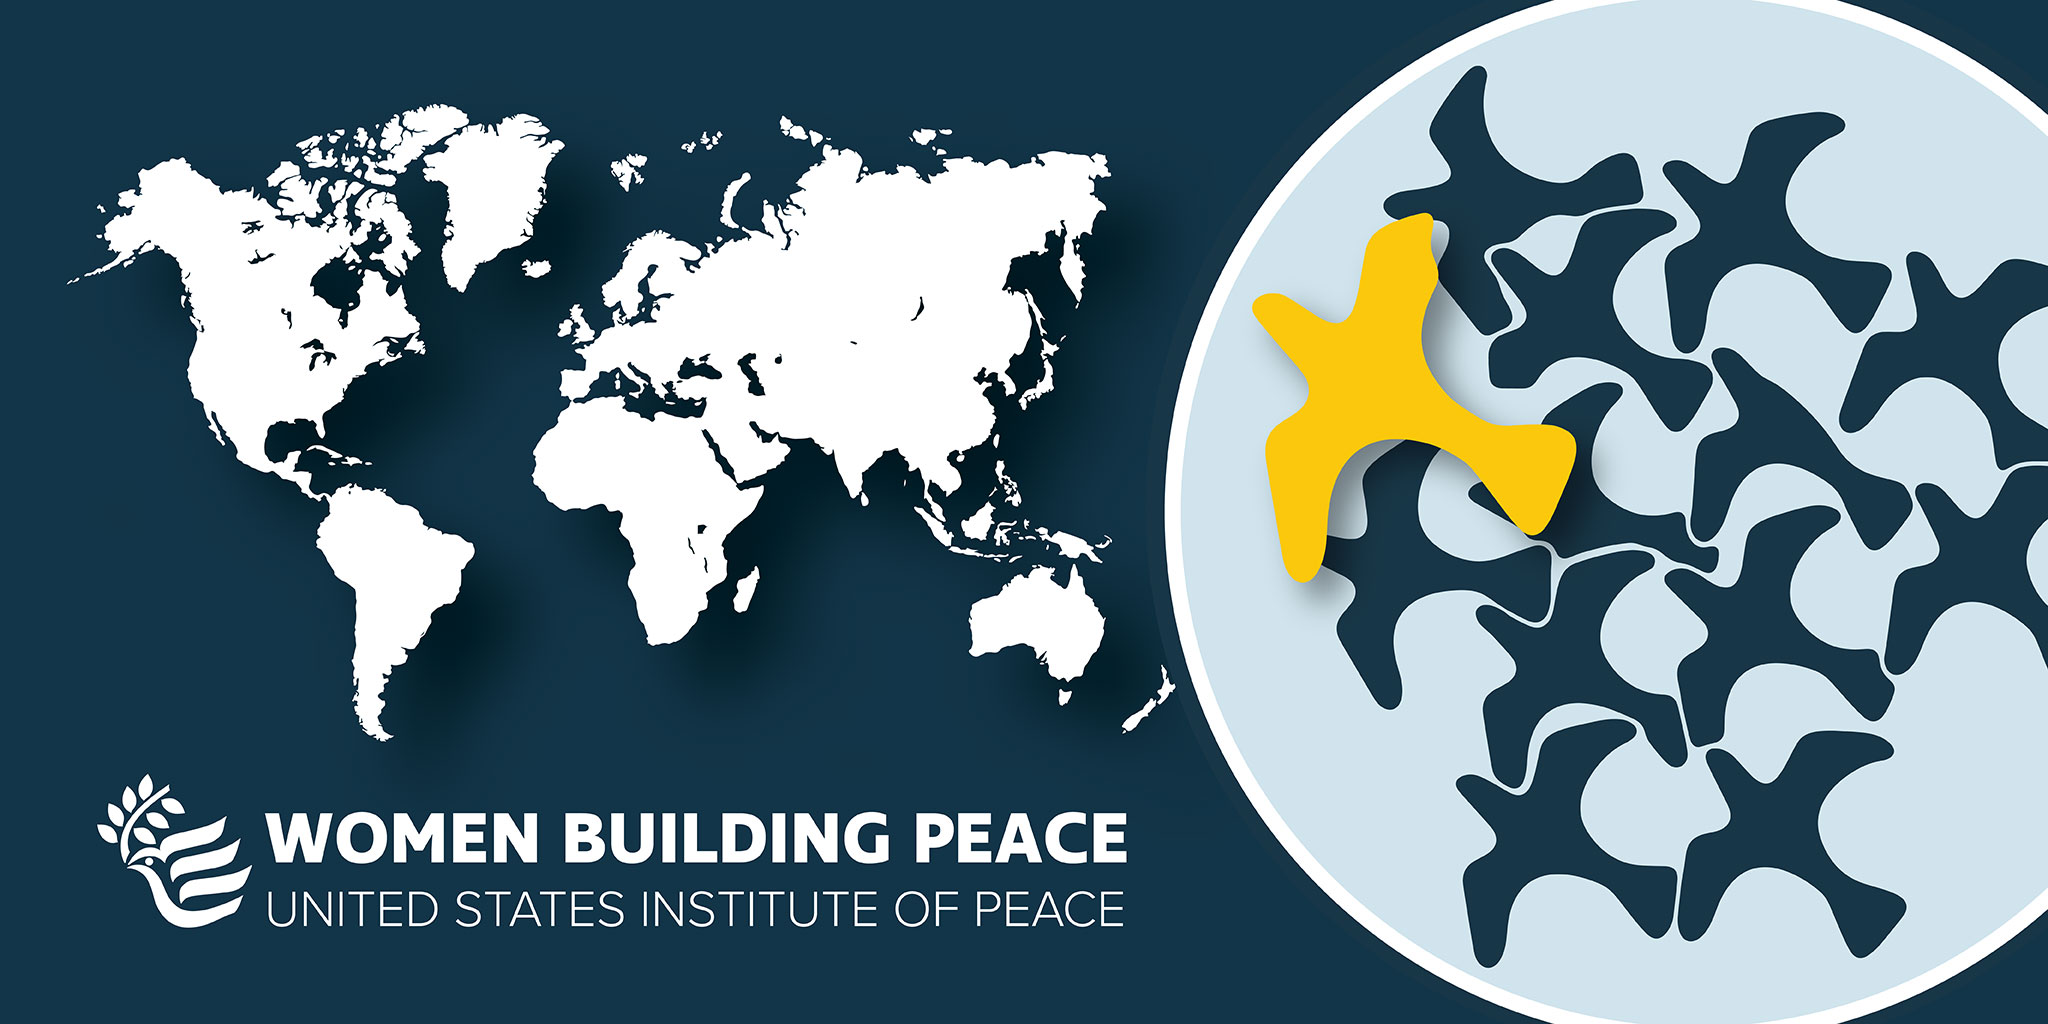 Graphic with a map, the Women's Building peace logo and an illustration of a flock of doves